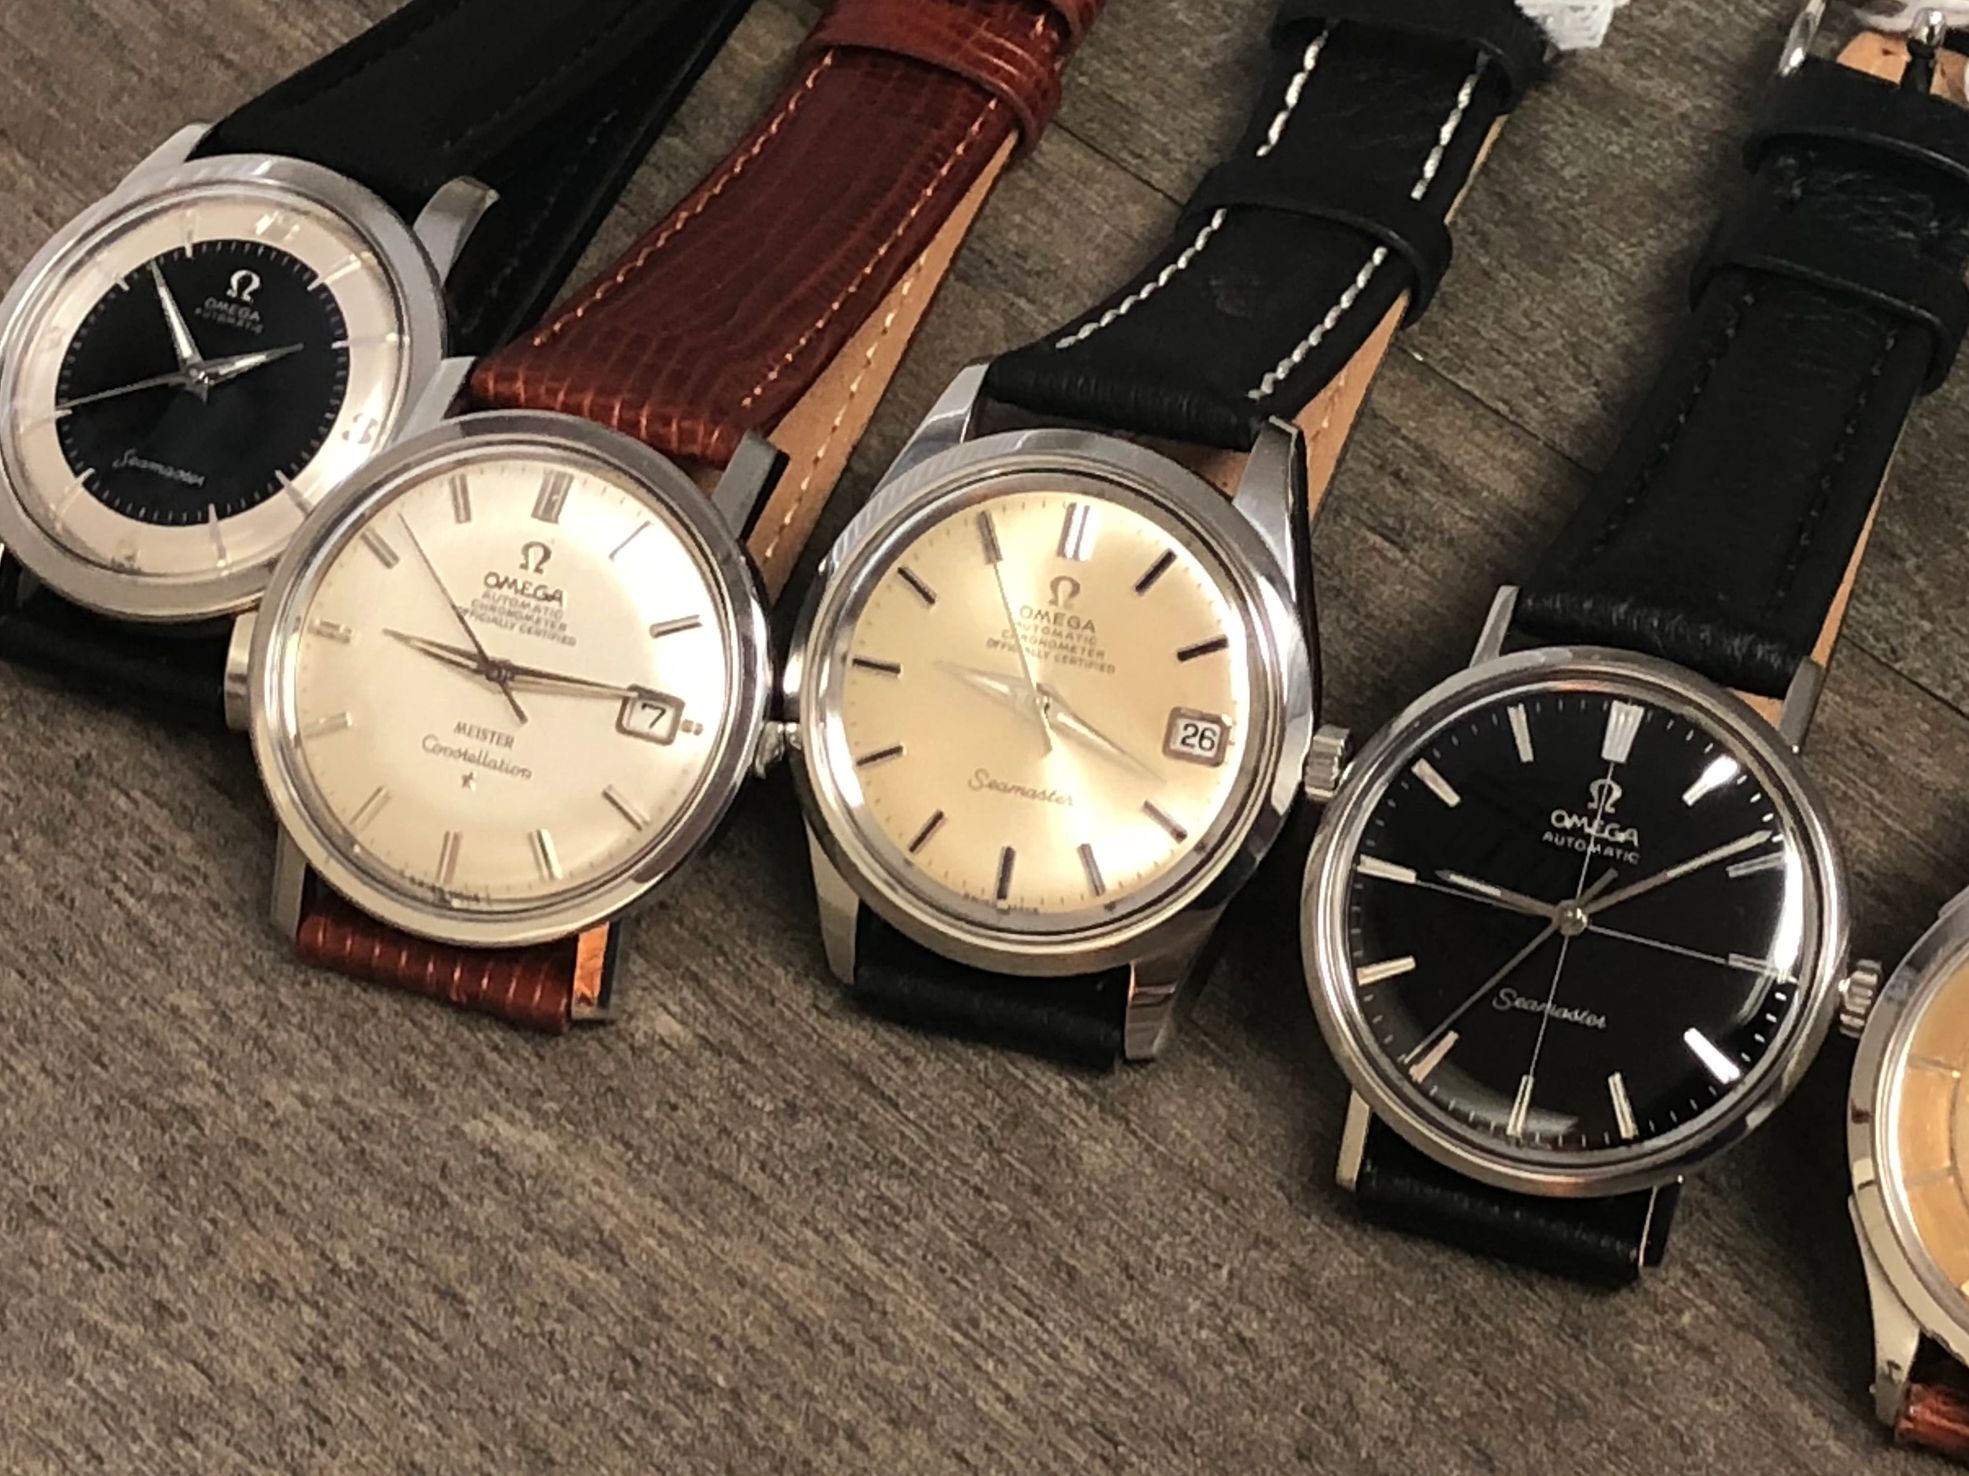 OmegaAddict - Omega Watch Sales, Watch Repair, Vintage Watch Service